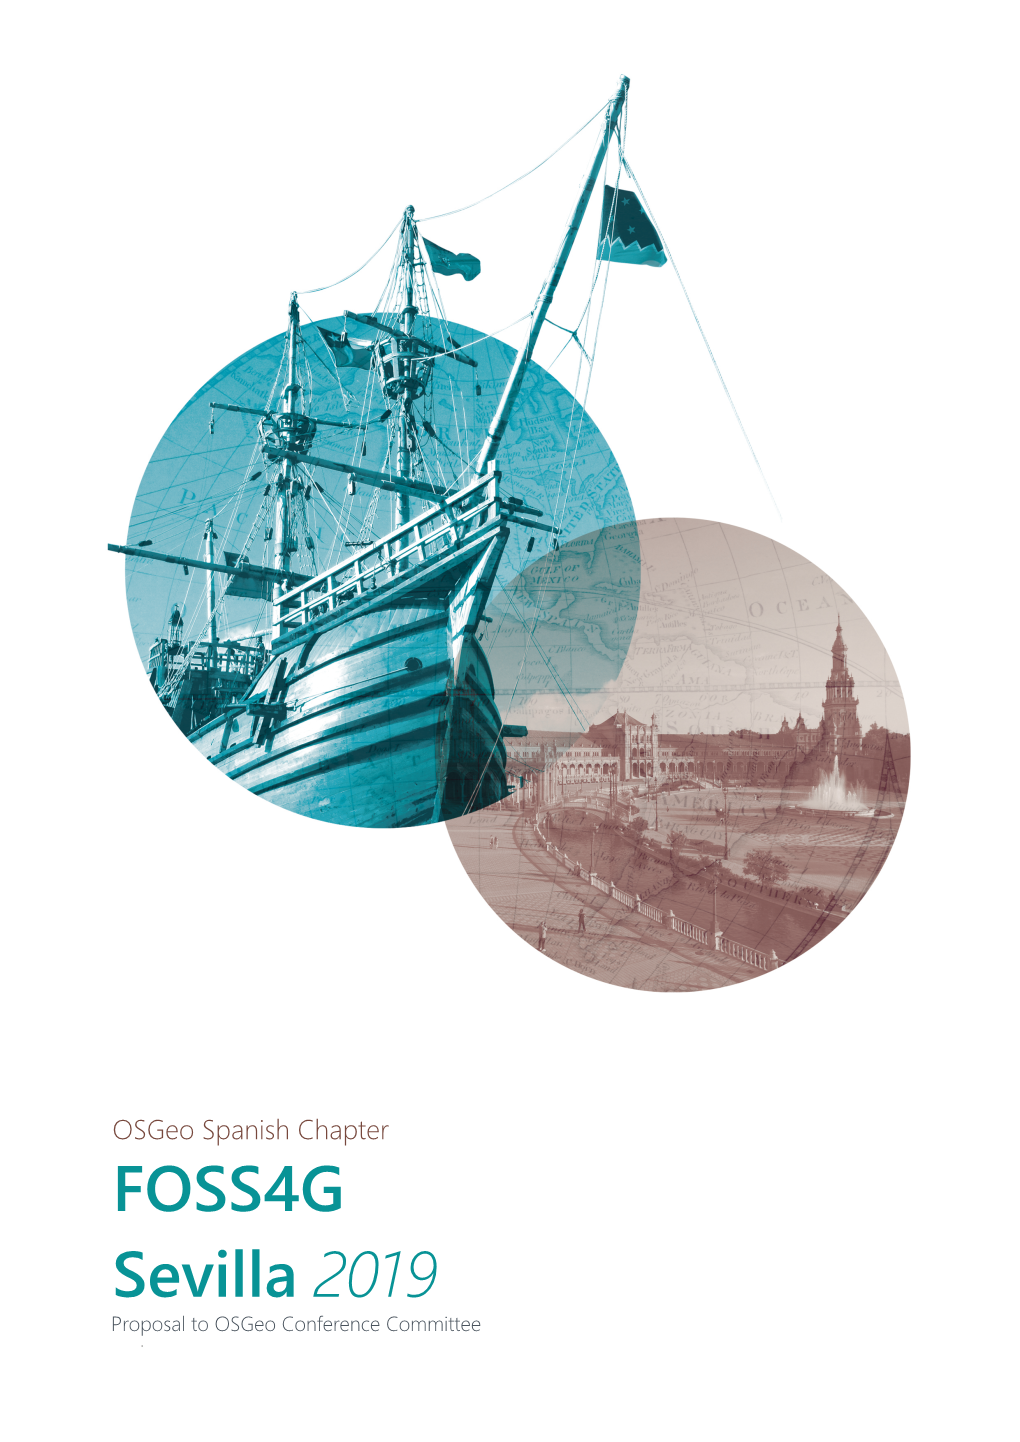 FOSS4G Sevilla 2019 Proposal to Osgeo Conference Committee